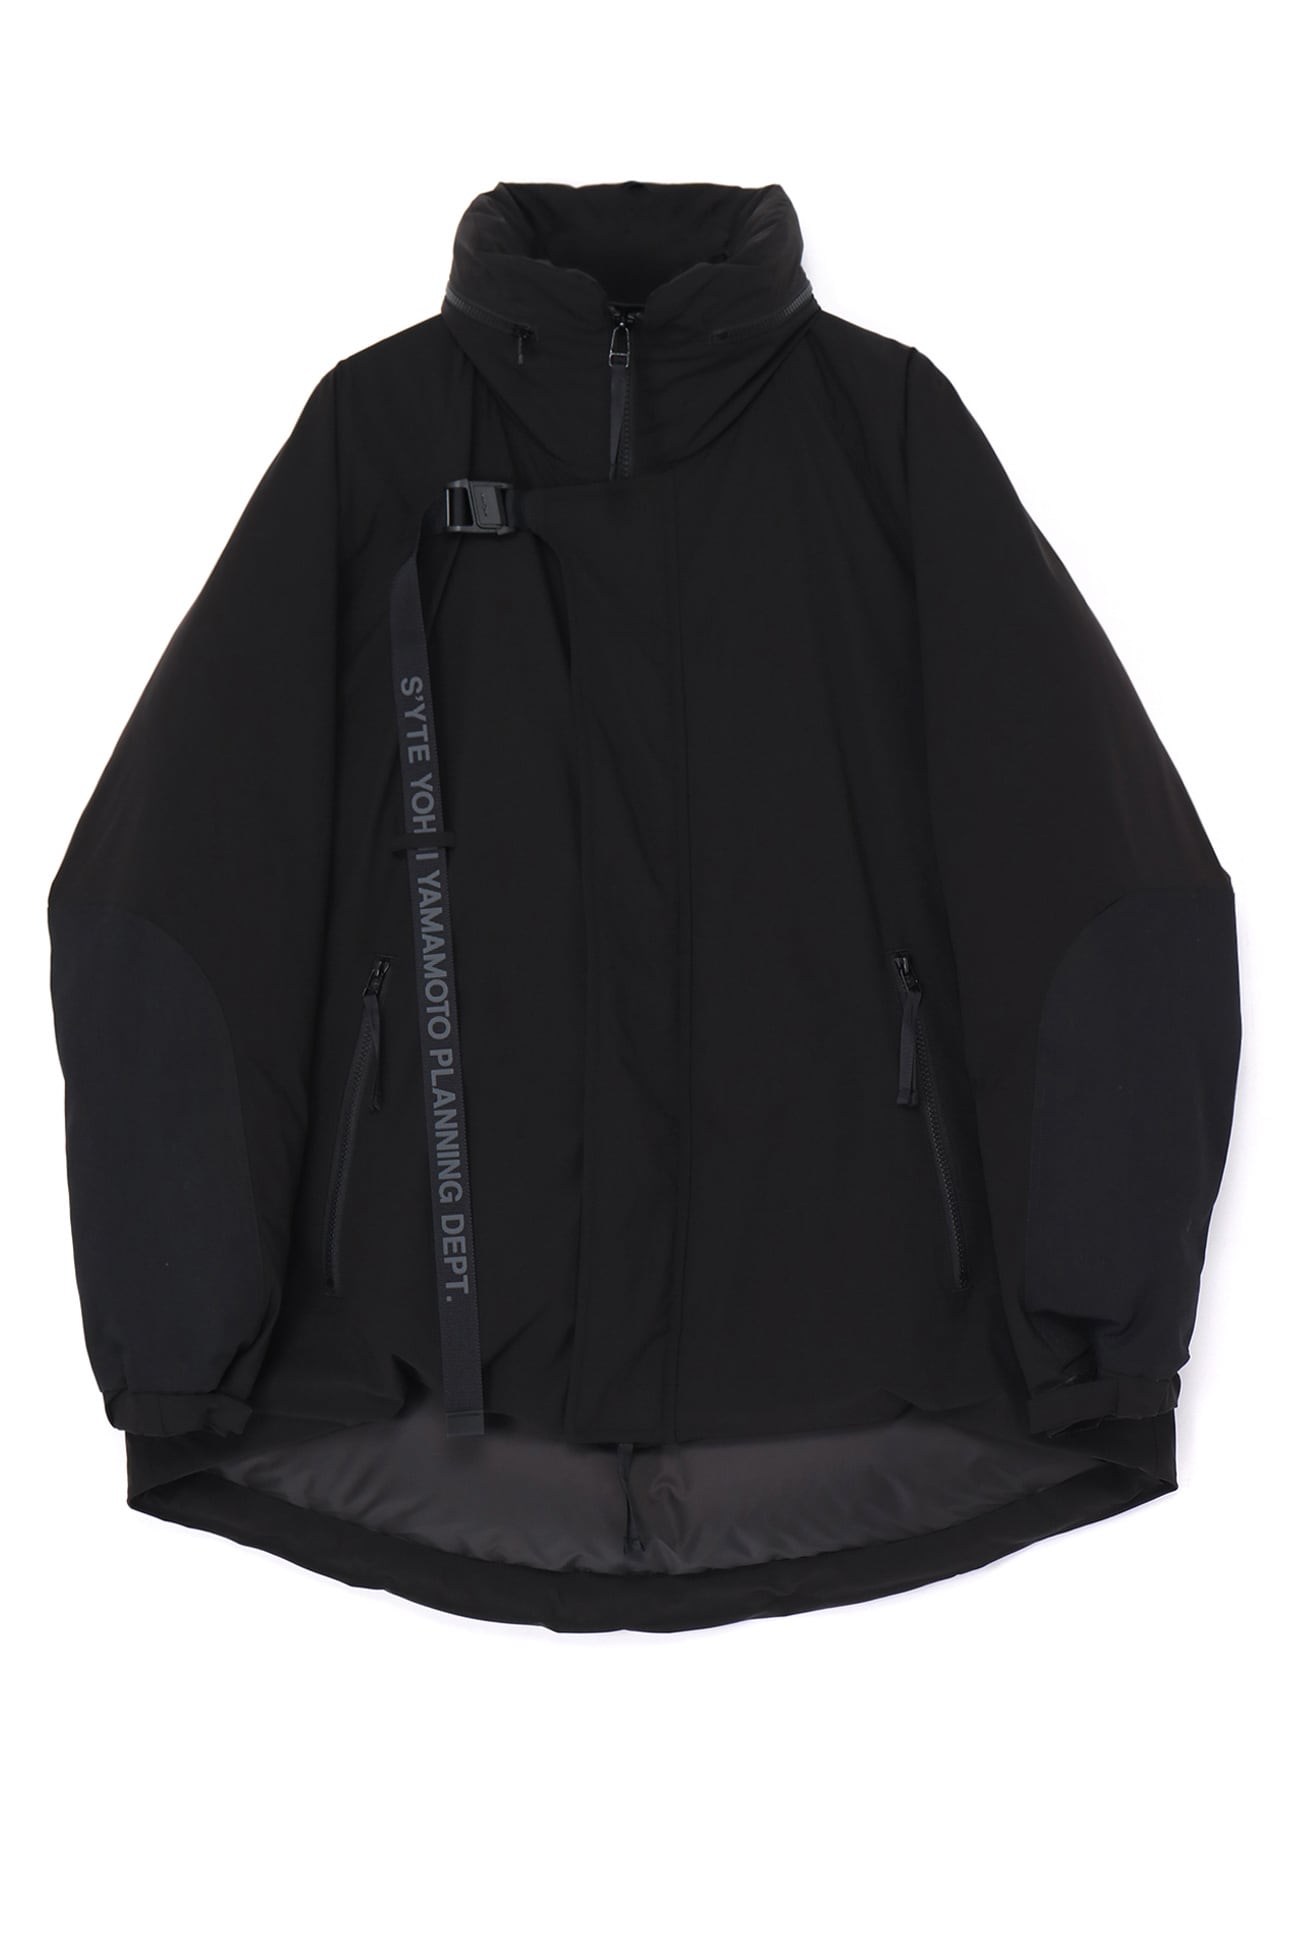 SOLOTEX SEAMLESS DOWN MONSTER PARKA(M Black): S'YTE｜THE SHOP